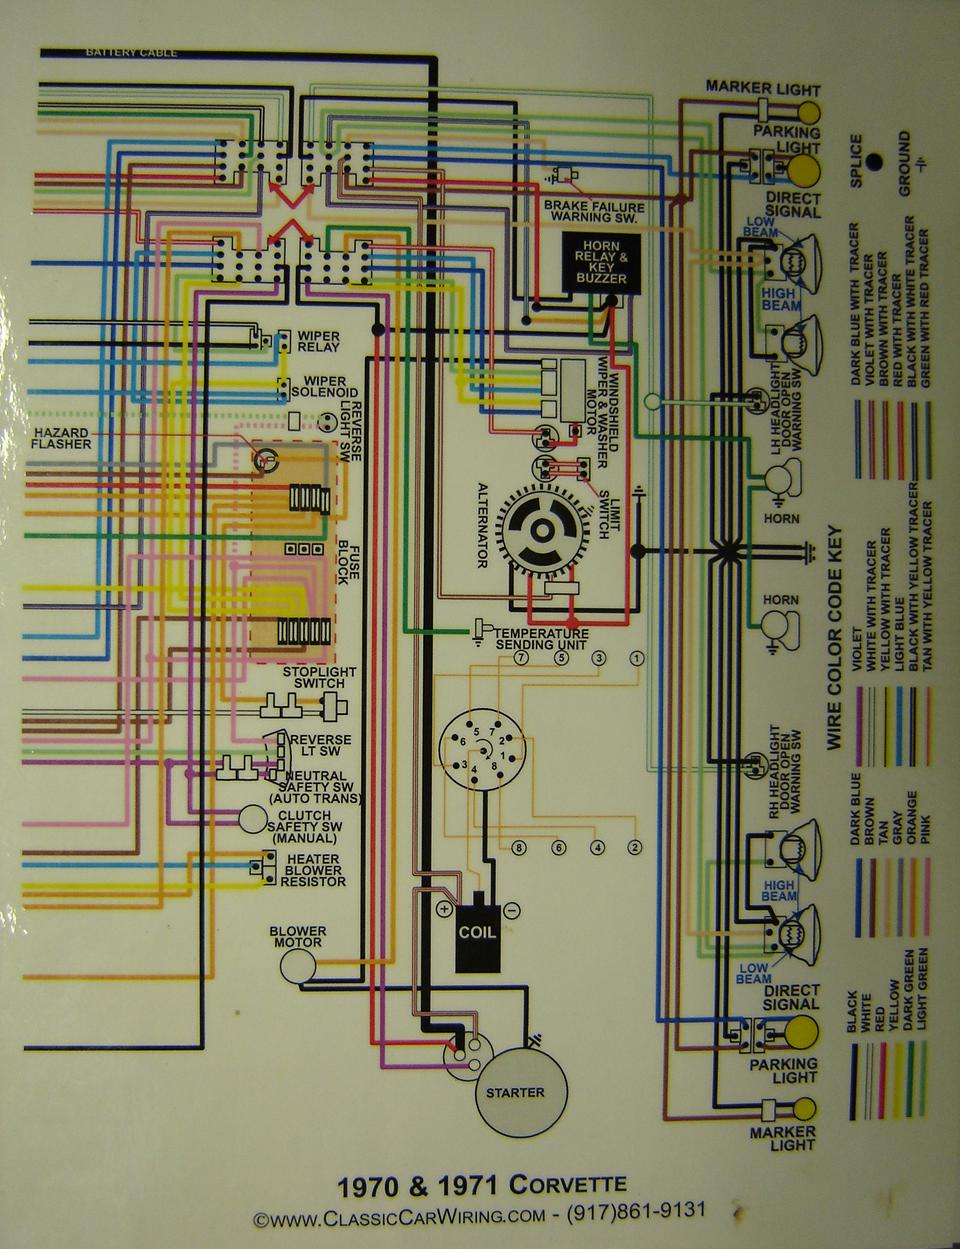 Anyone have a pdf of a 1970 bb cpe wiring diagram - Page 2